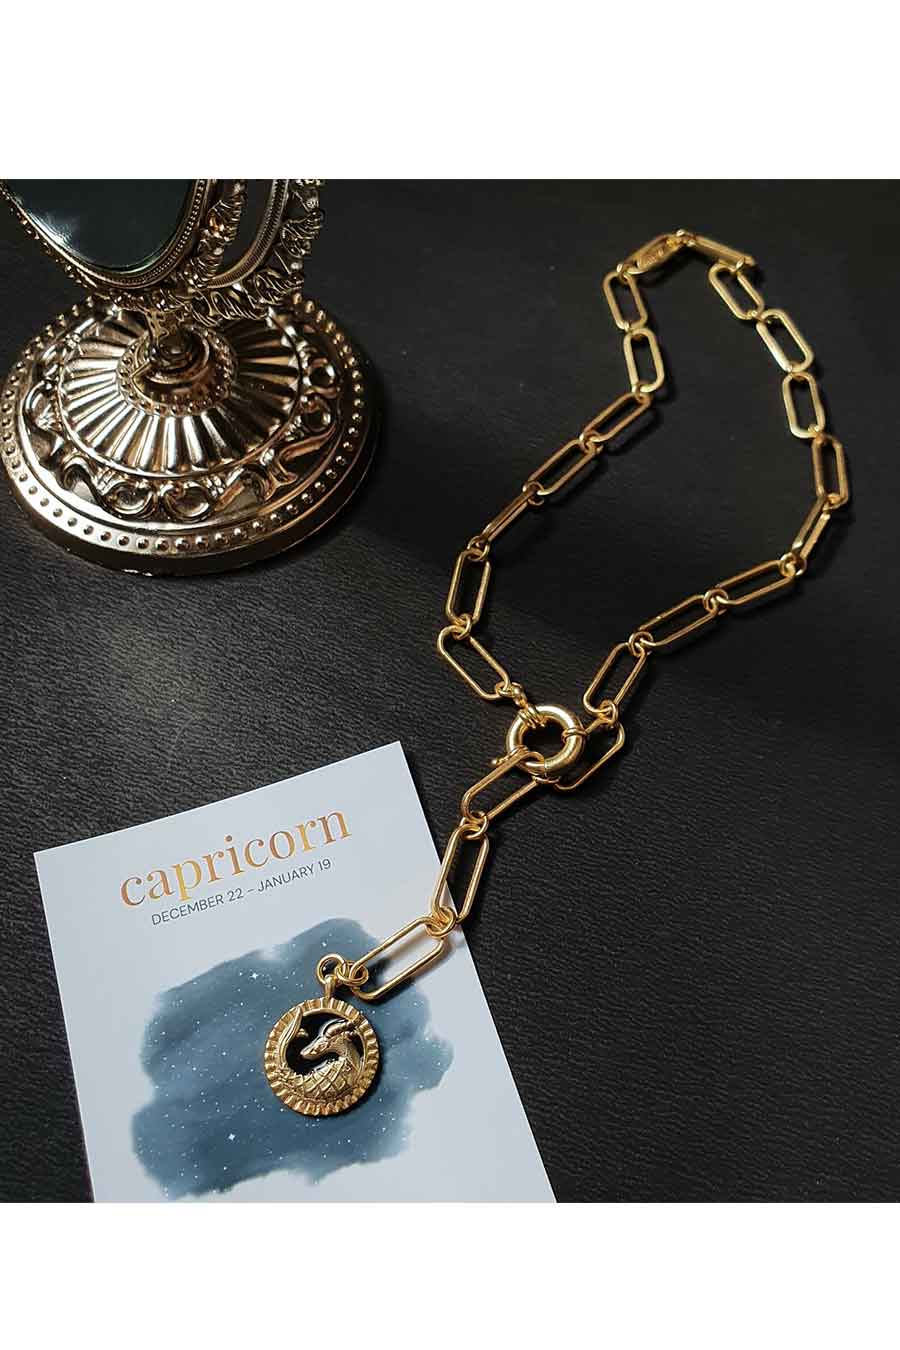 Soul of the Sea Goat - Capricorn Necklace